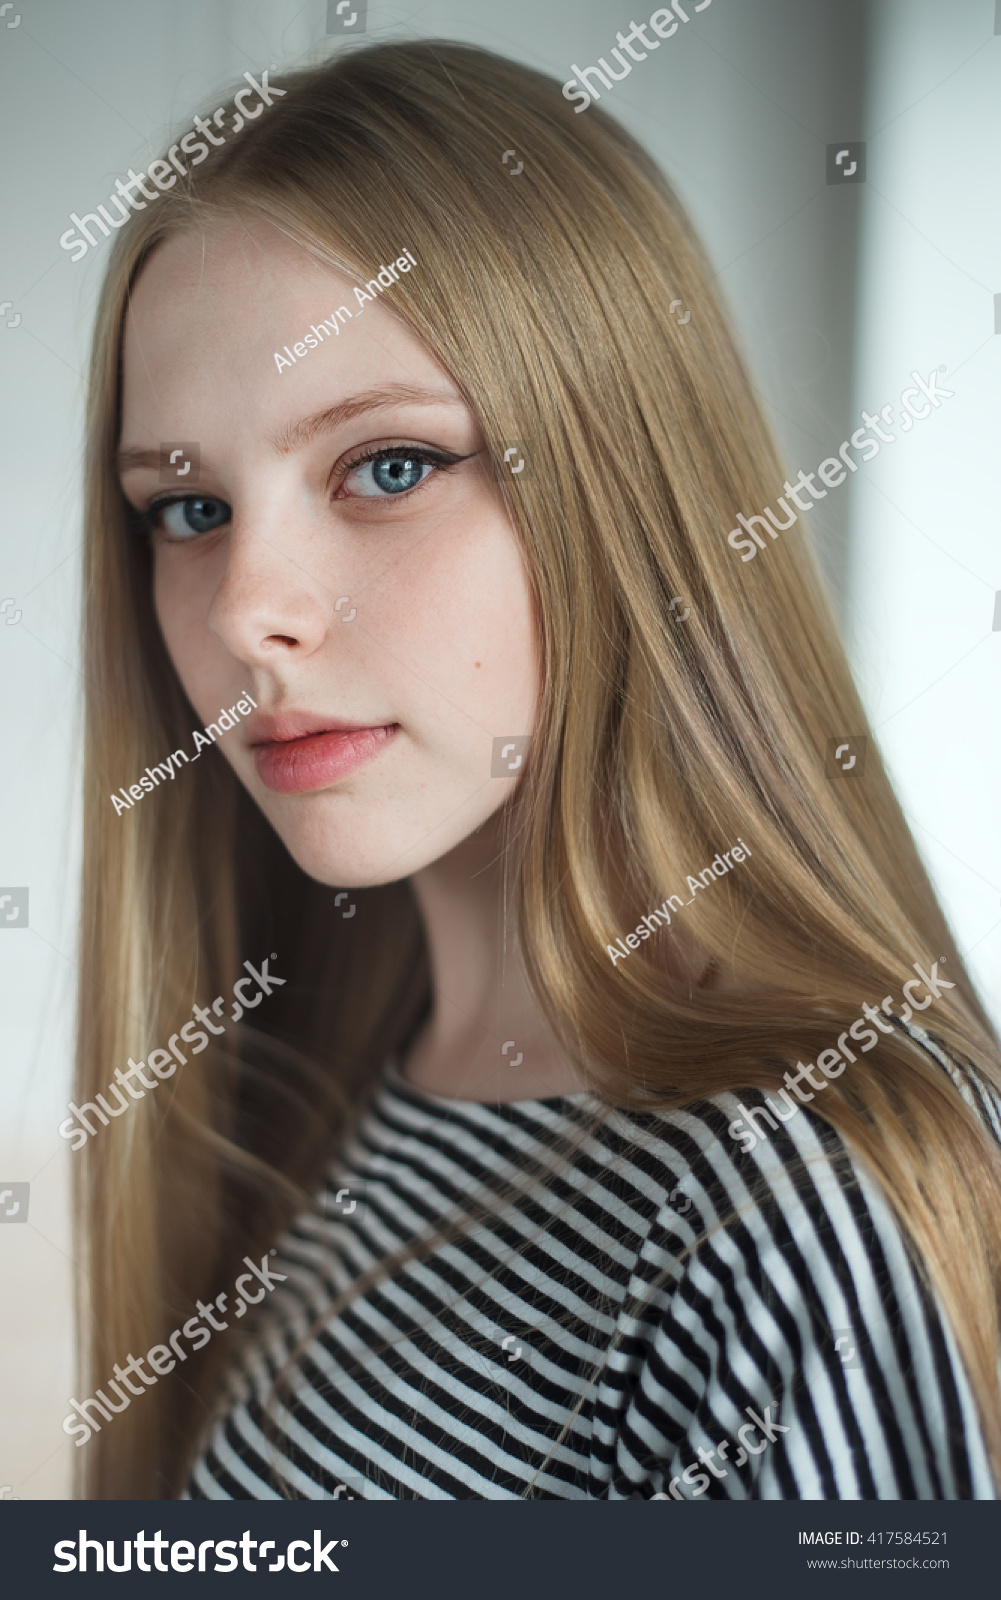 clean portrait of a pretty girl at home #417584521